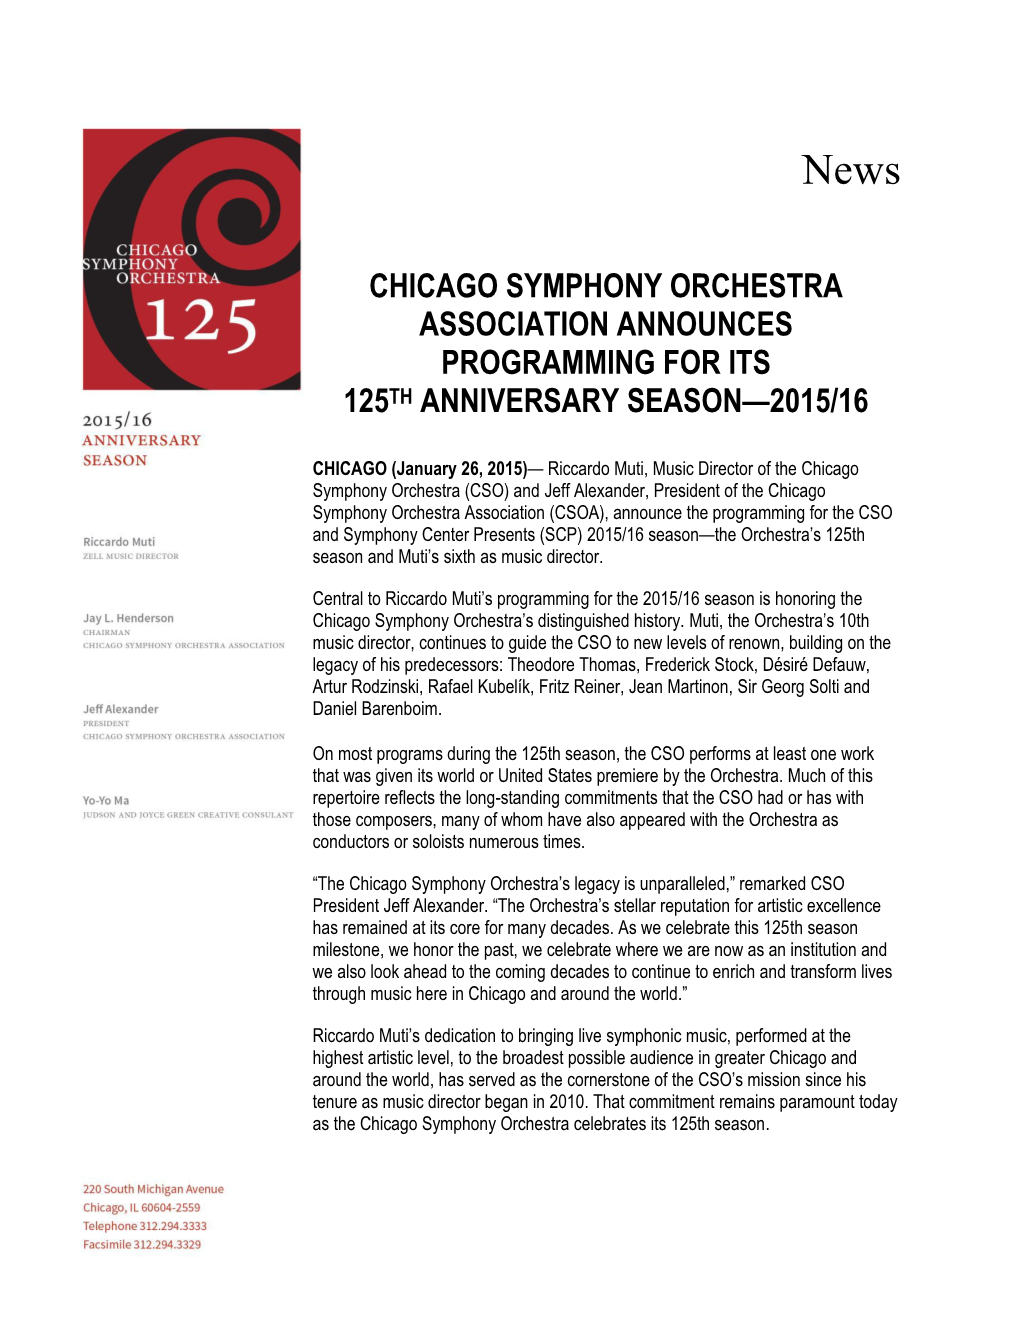 Chicago Symphony Orchestra Association Announces Programming for Its 125Th Anniversary Season—2015/16